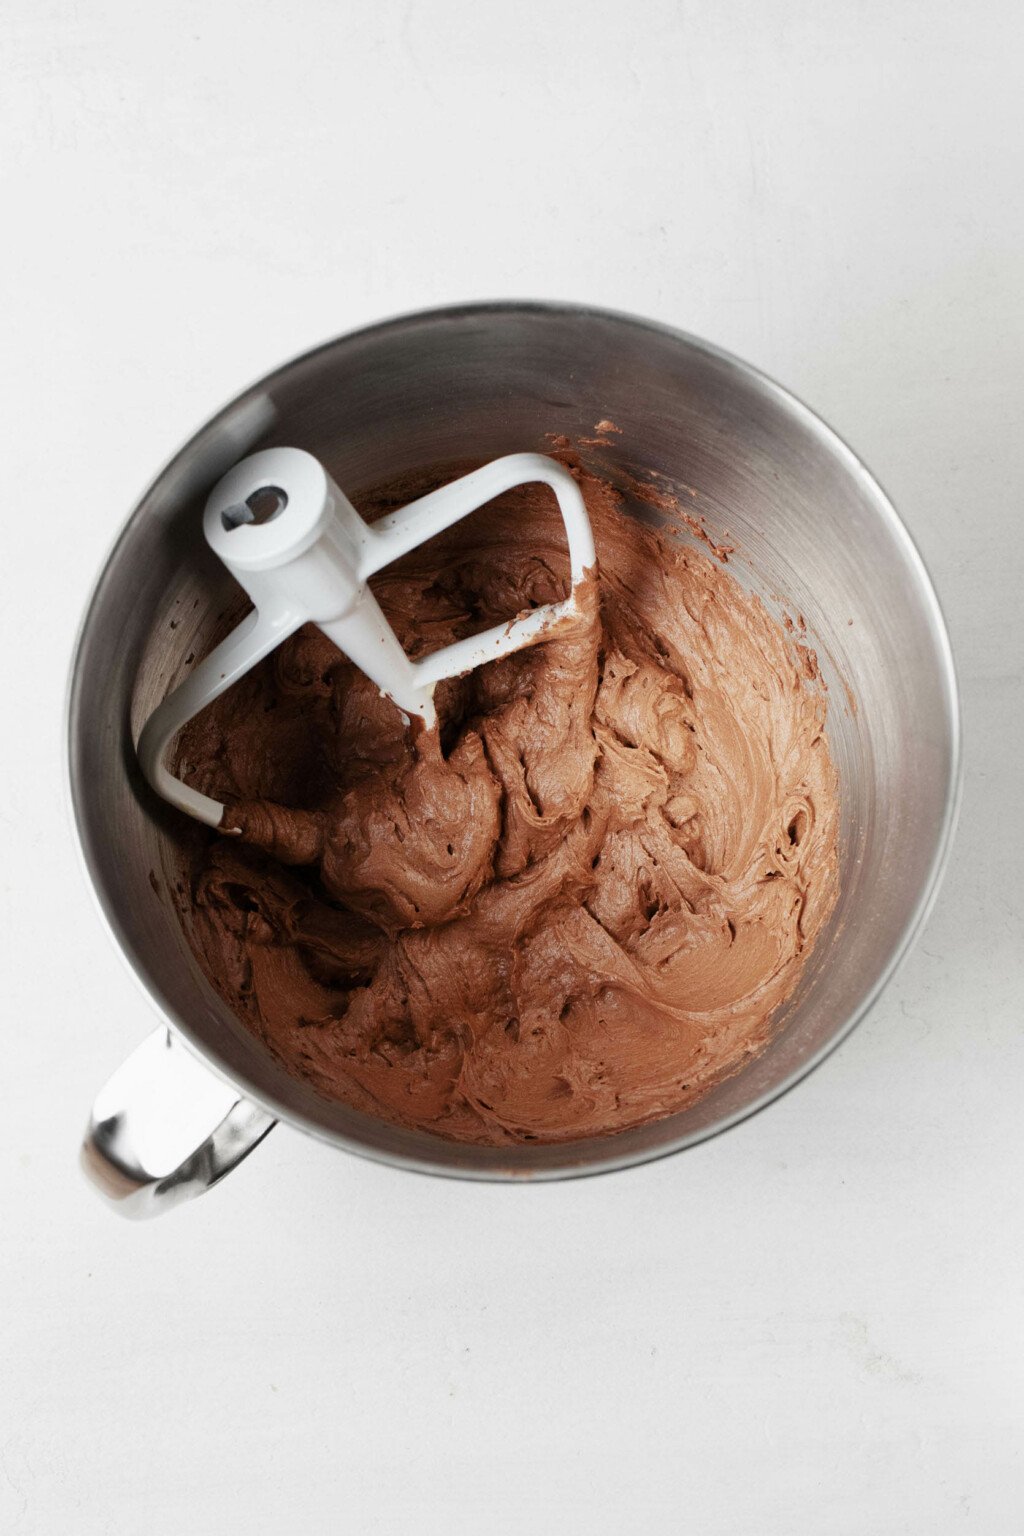 The silver bowl of a stand mixer has just been used to prepare vegan chocolate frosting.  The white paddle attachment is in the bowl.